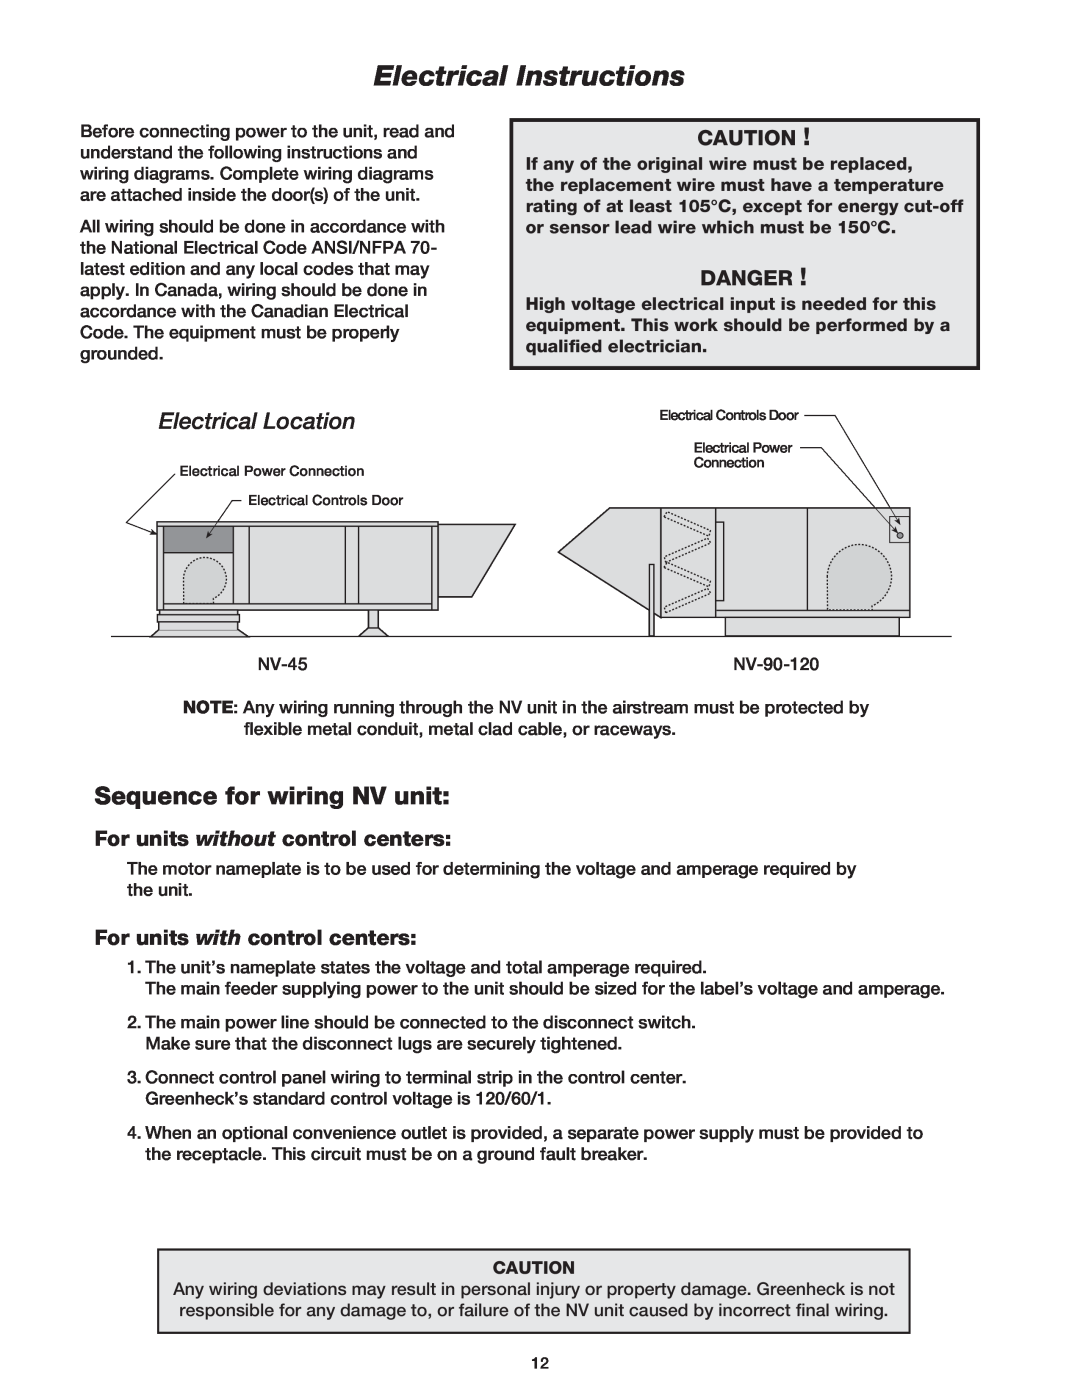 Greenheck Fan Outdoor Air Ventilator Electrical Instructions, Sequence for wiring NV unit, Danger, Electrical Location 